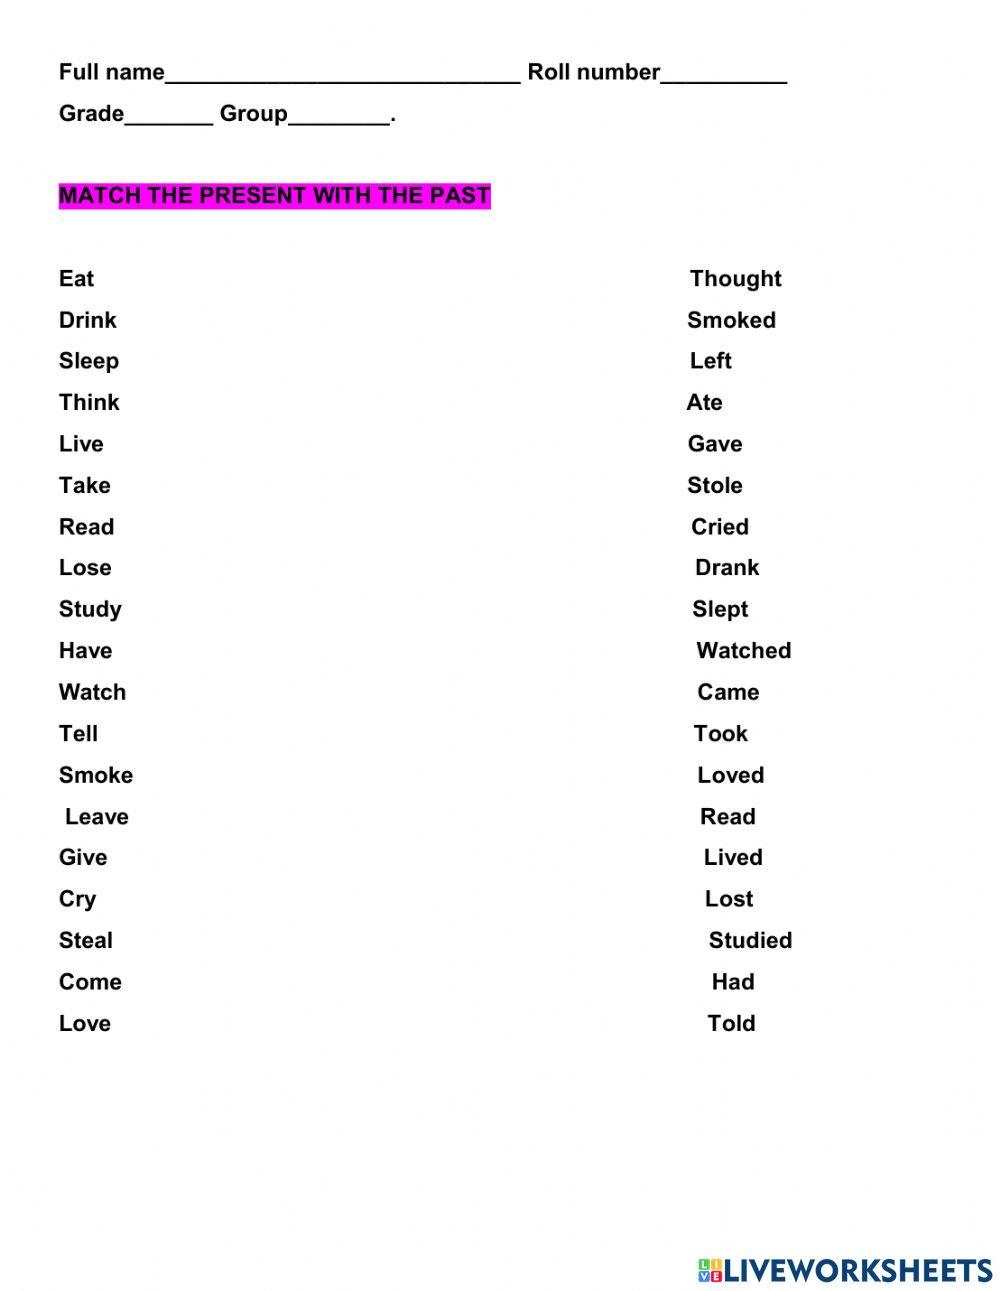 Verbs in present and past